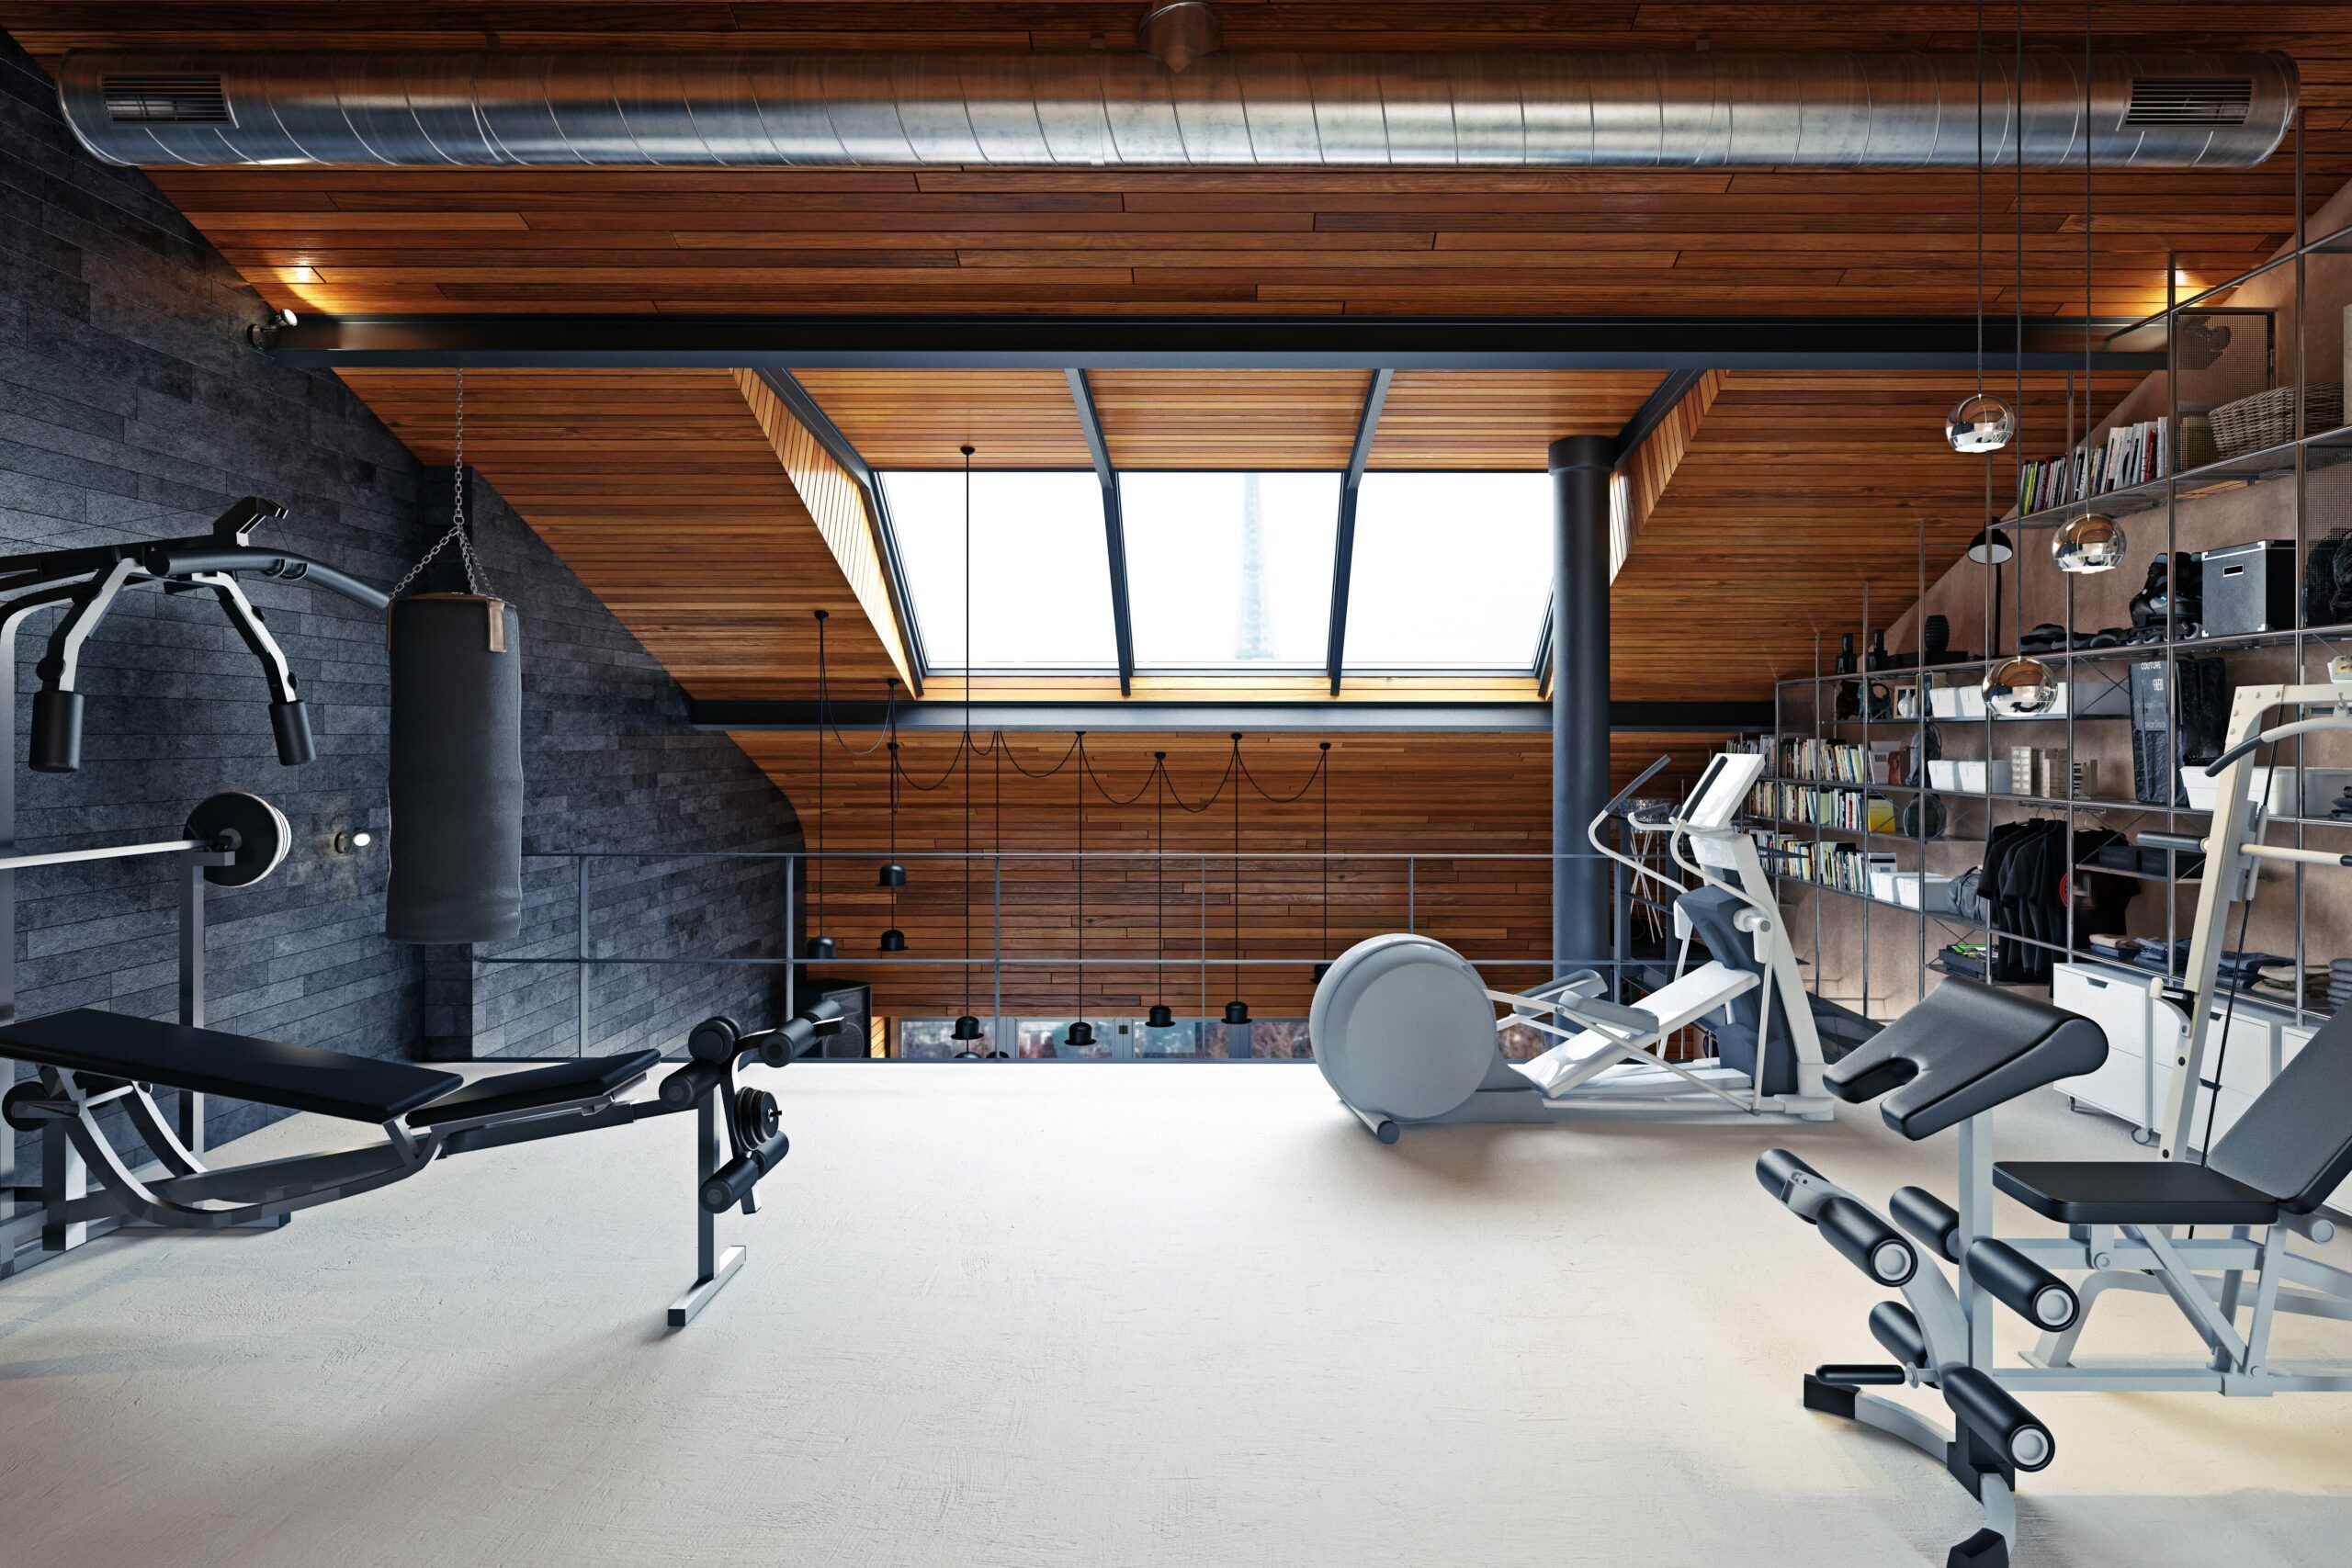 Home gym in an attic